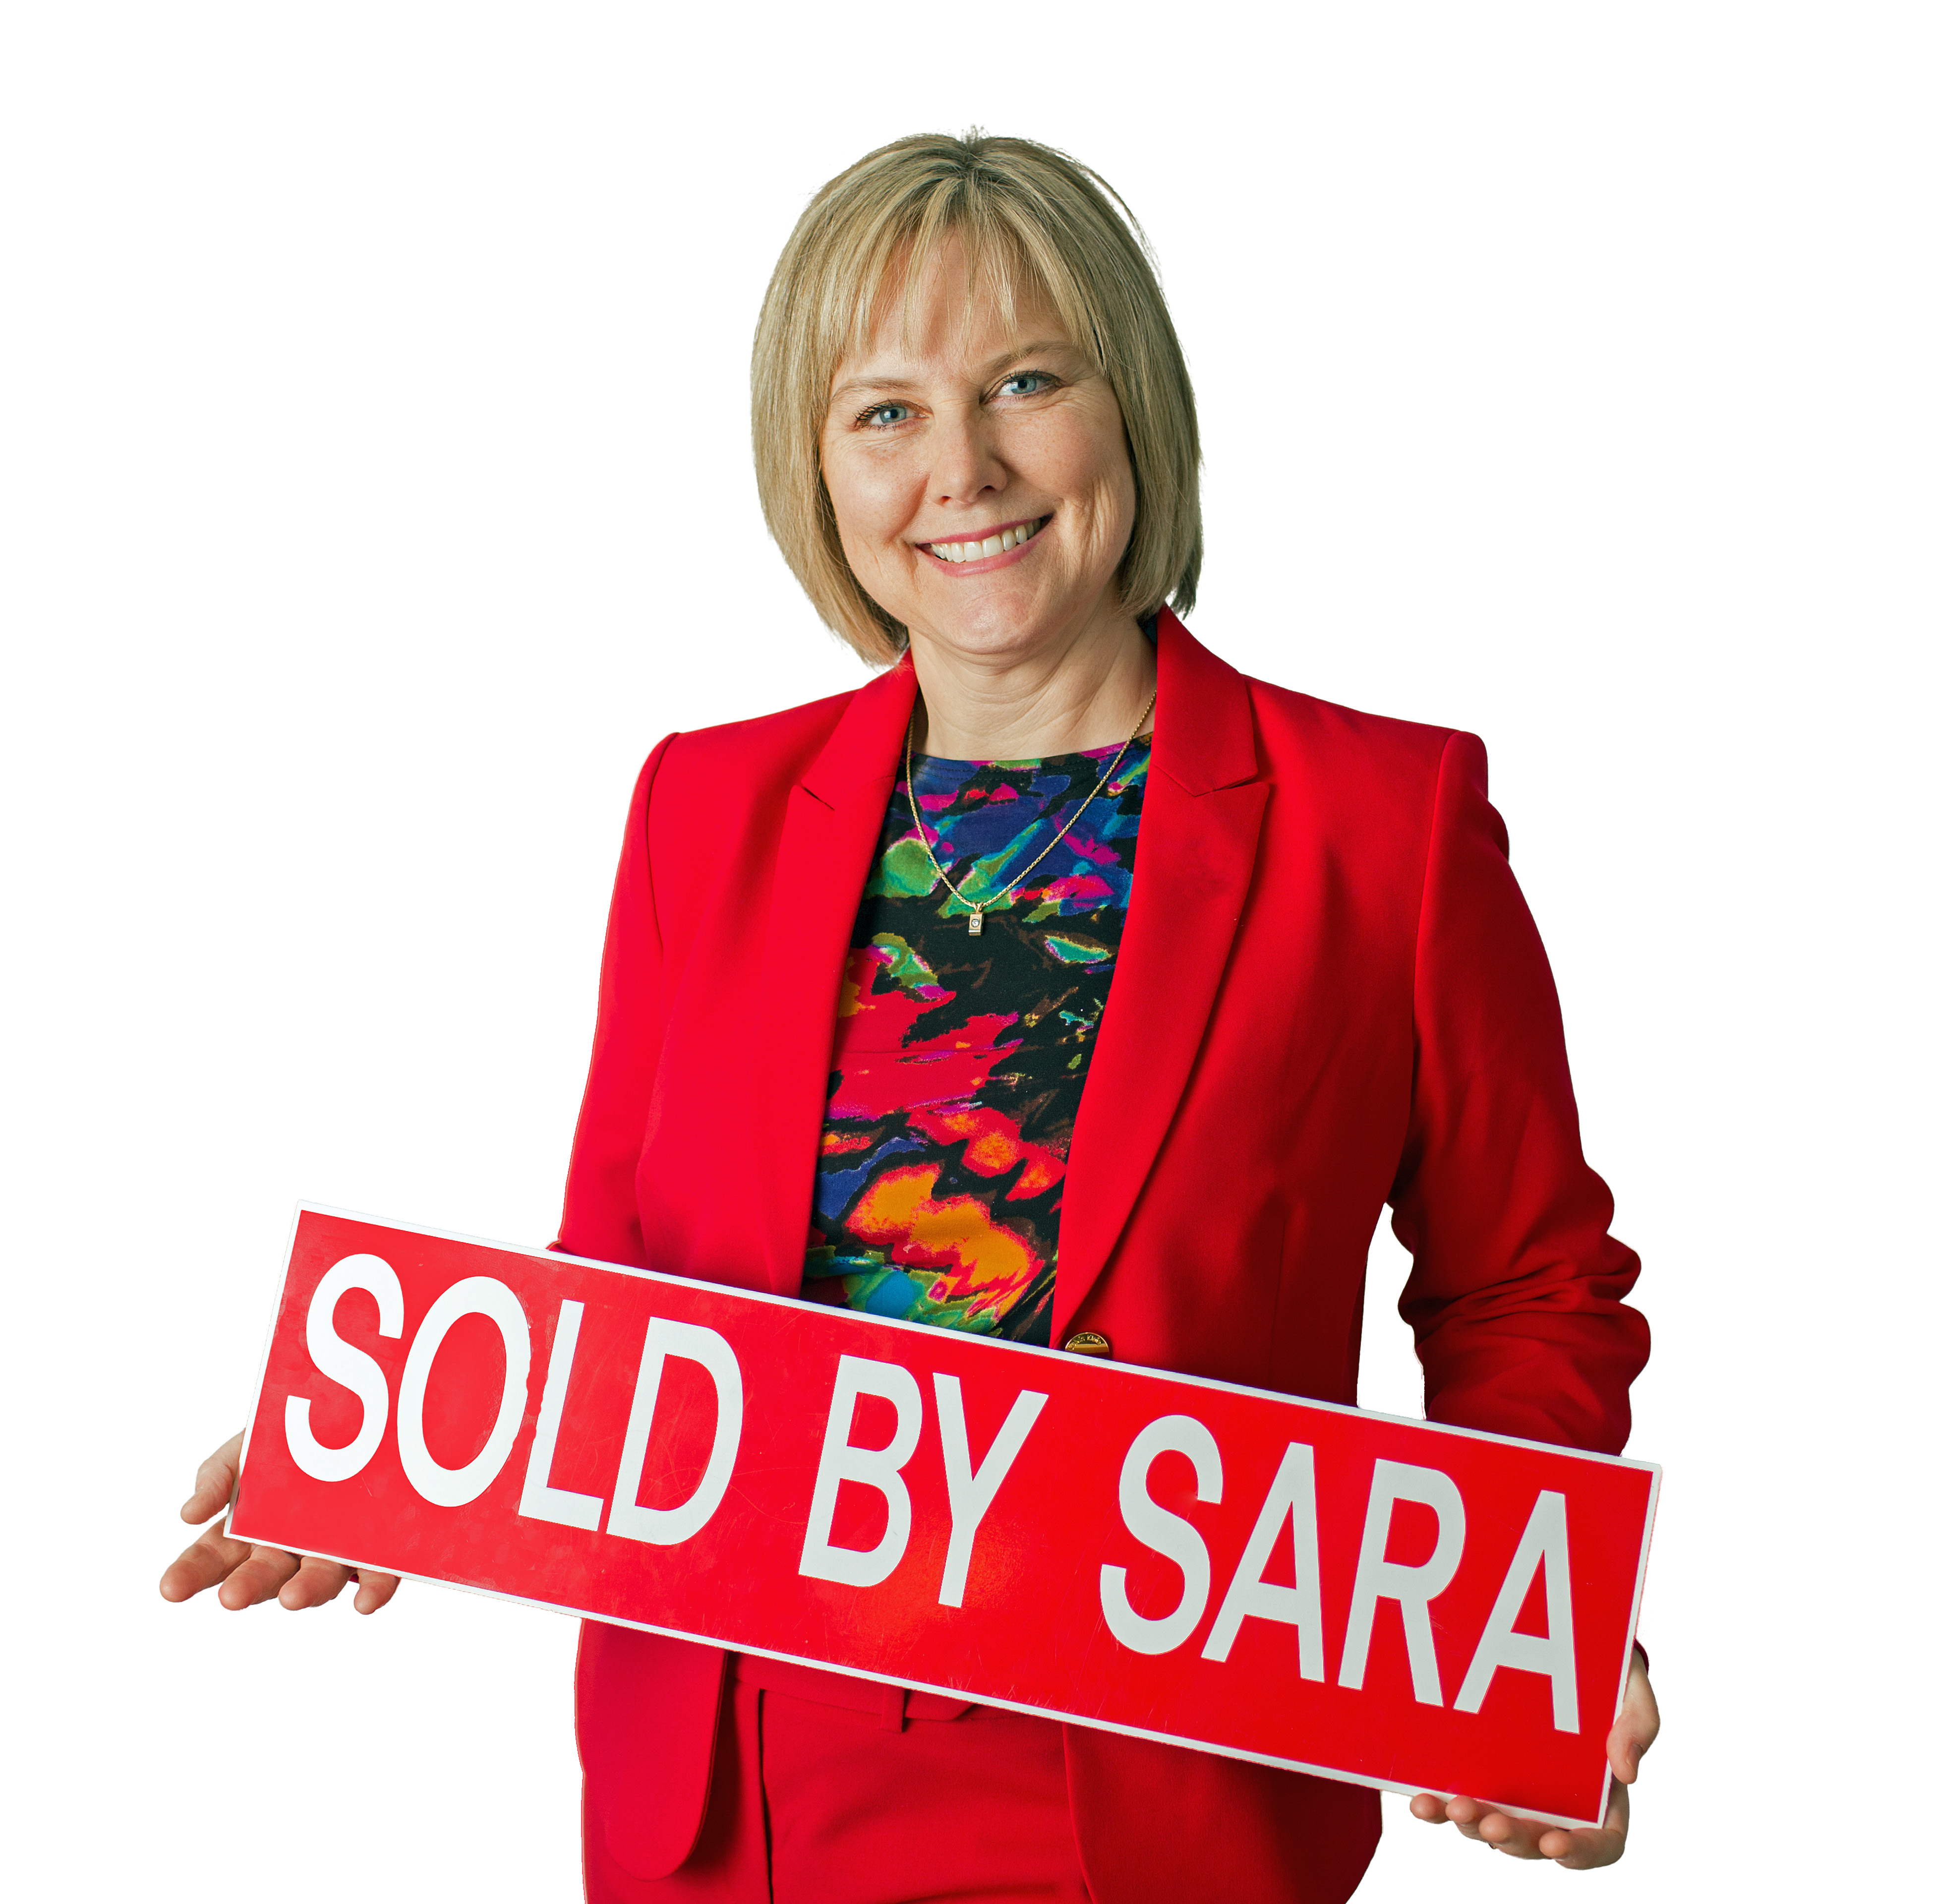 Mega agent Sara Dreyer and The Sold by Sara Team join Keller Williams Milwaukee Southwest